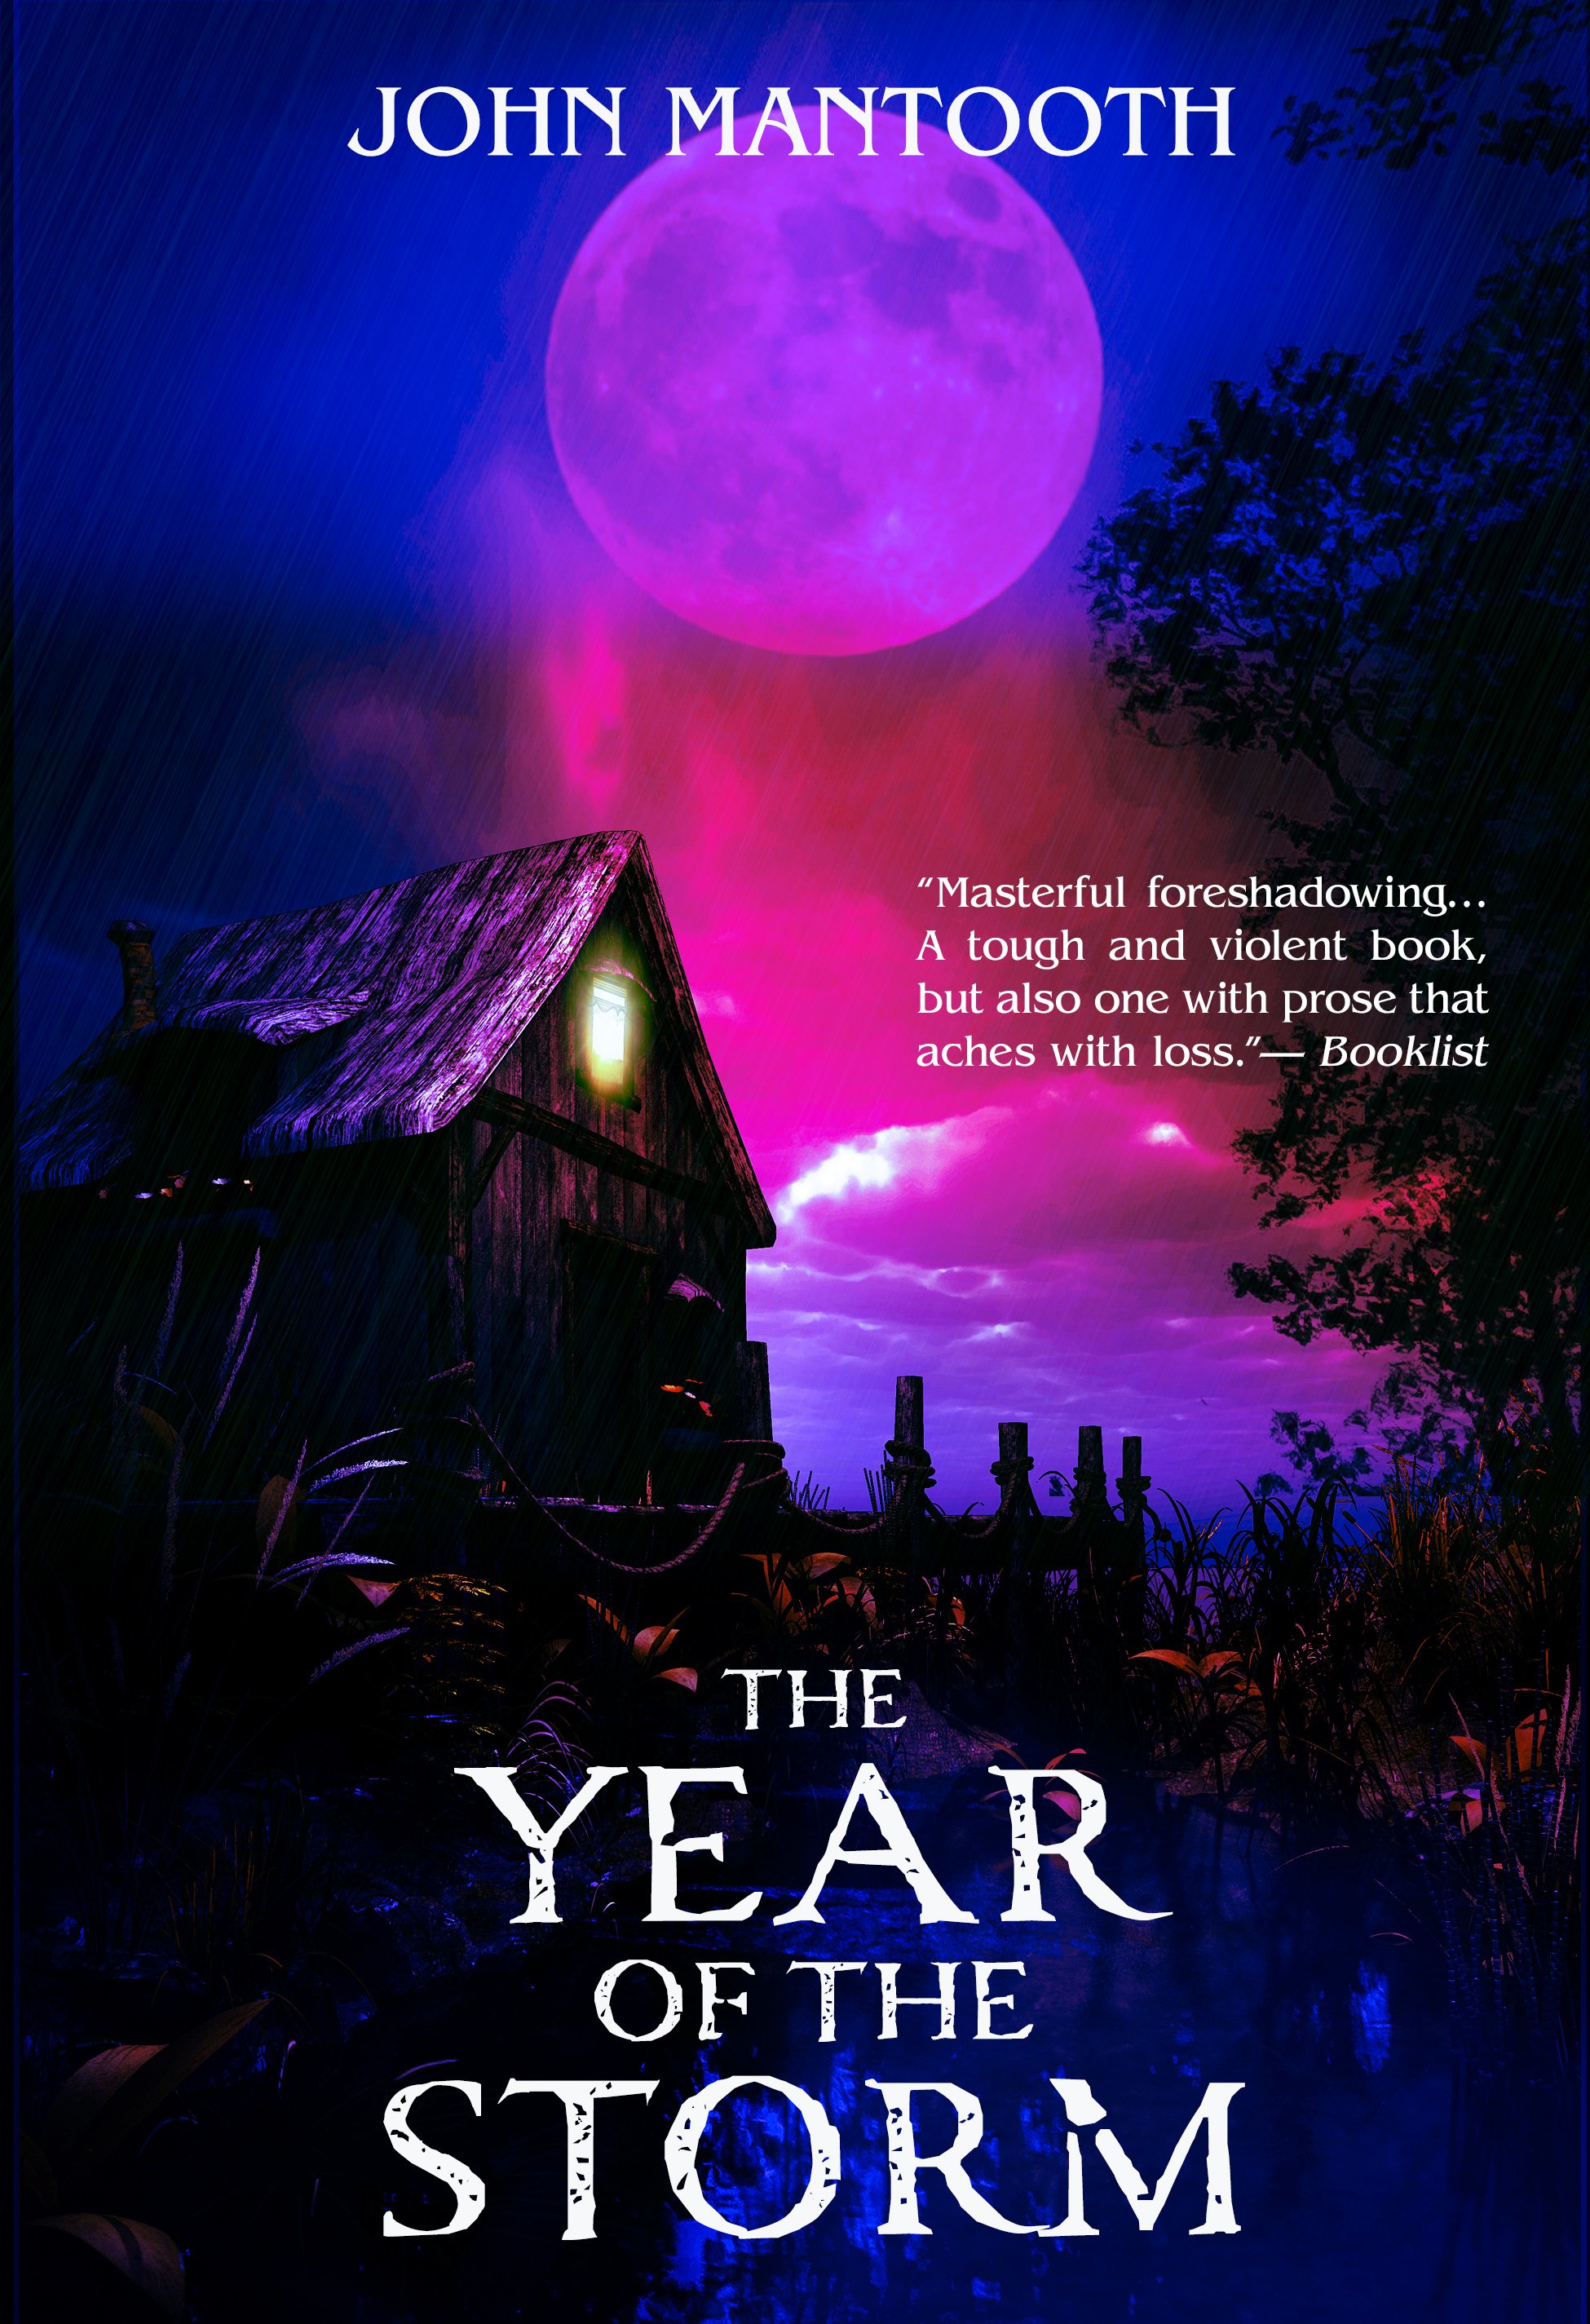 The Year of the Storm, by John Mantooth